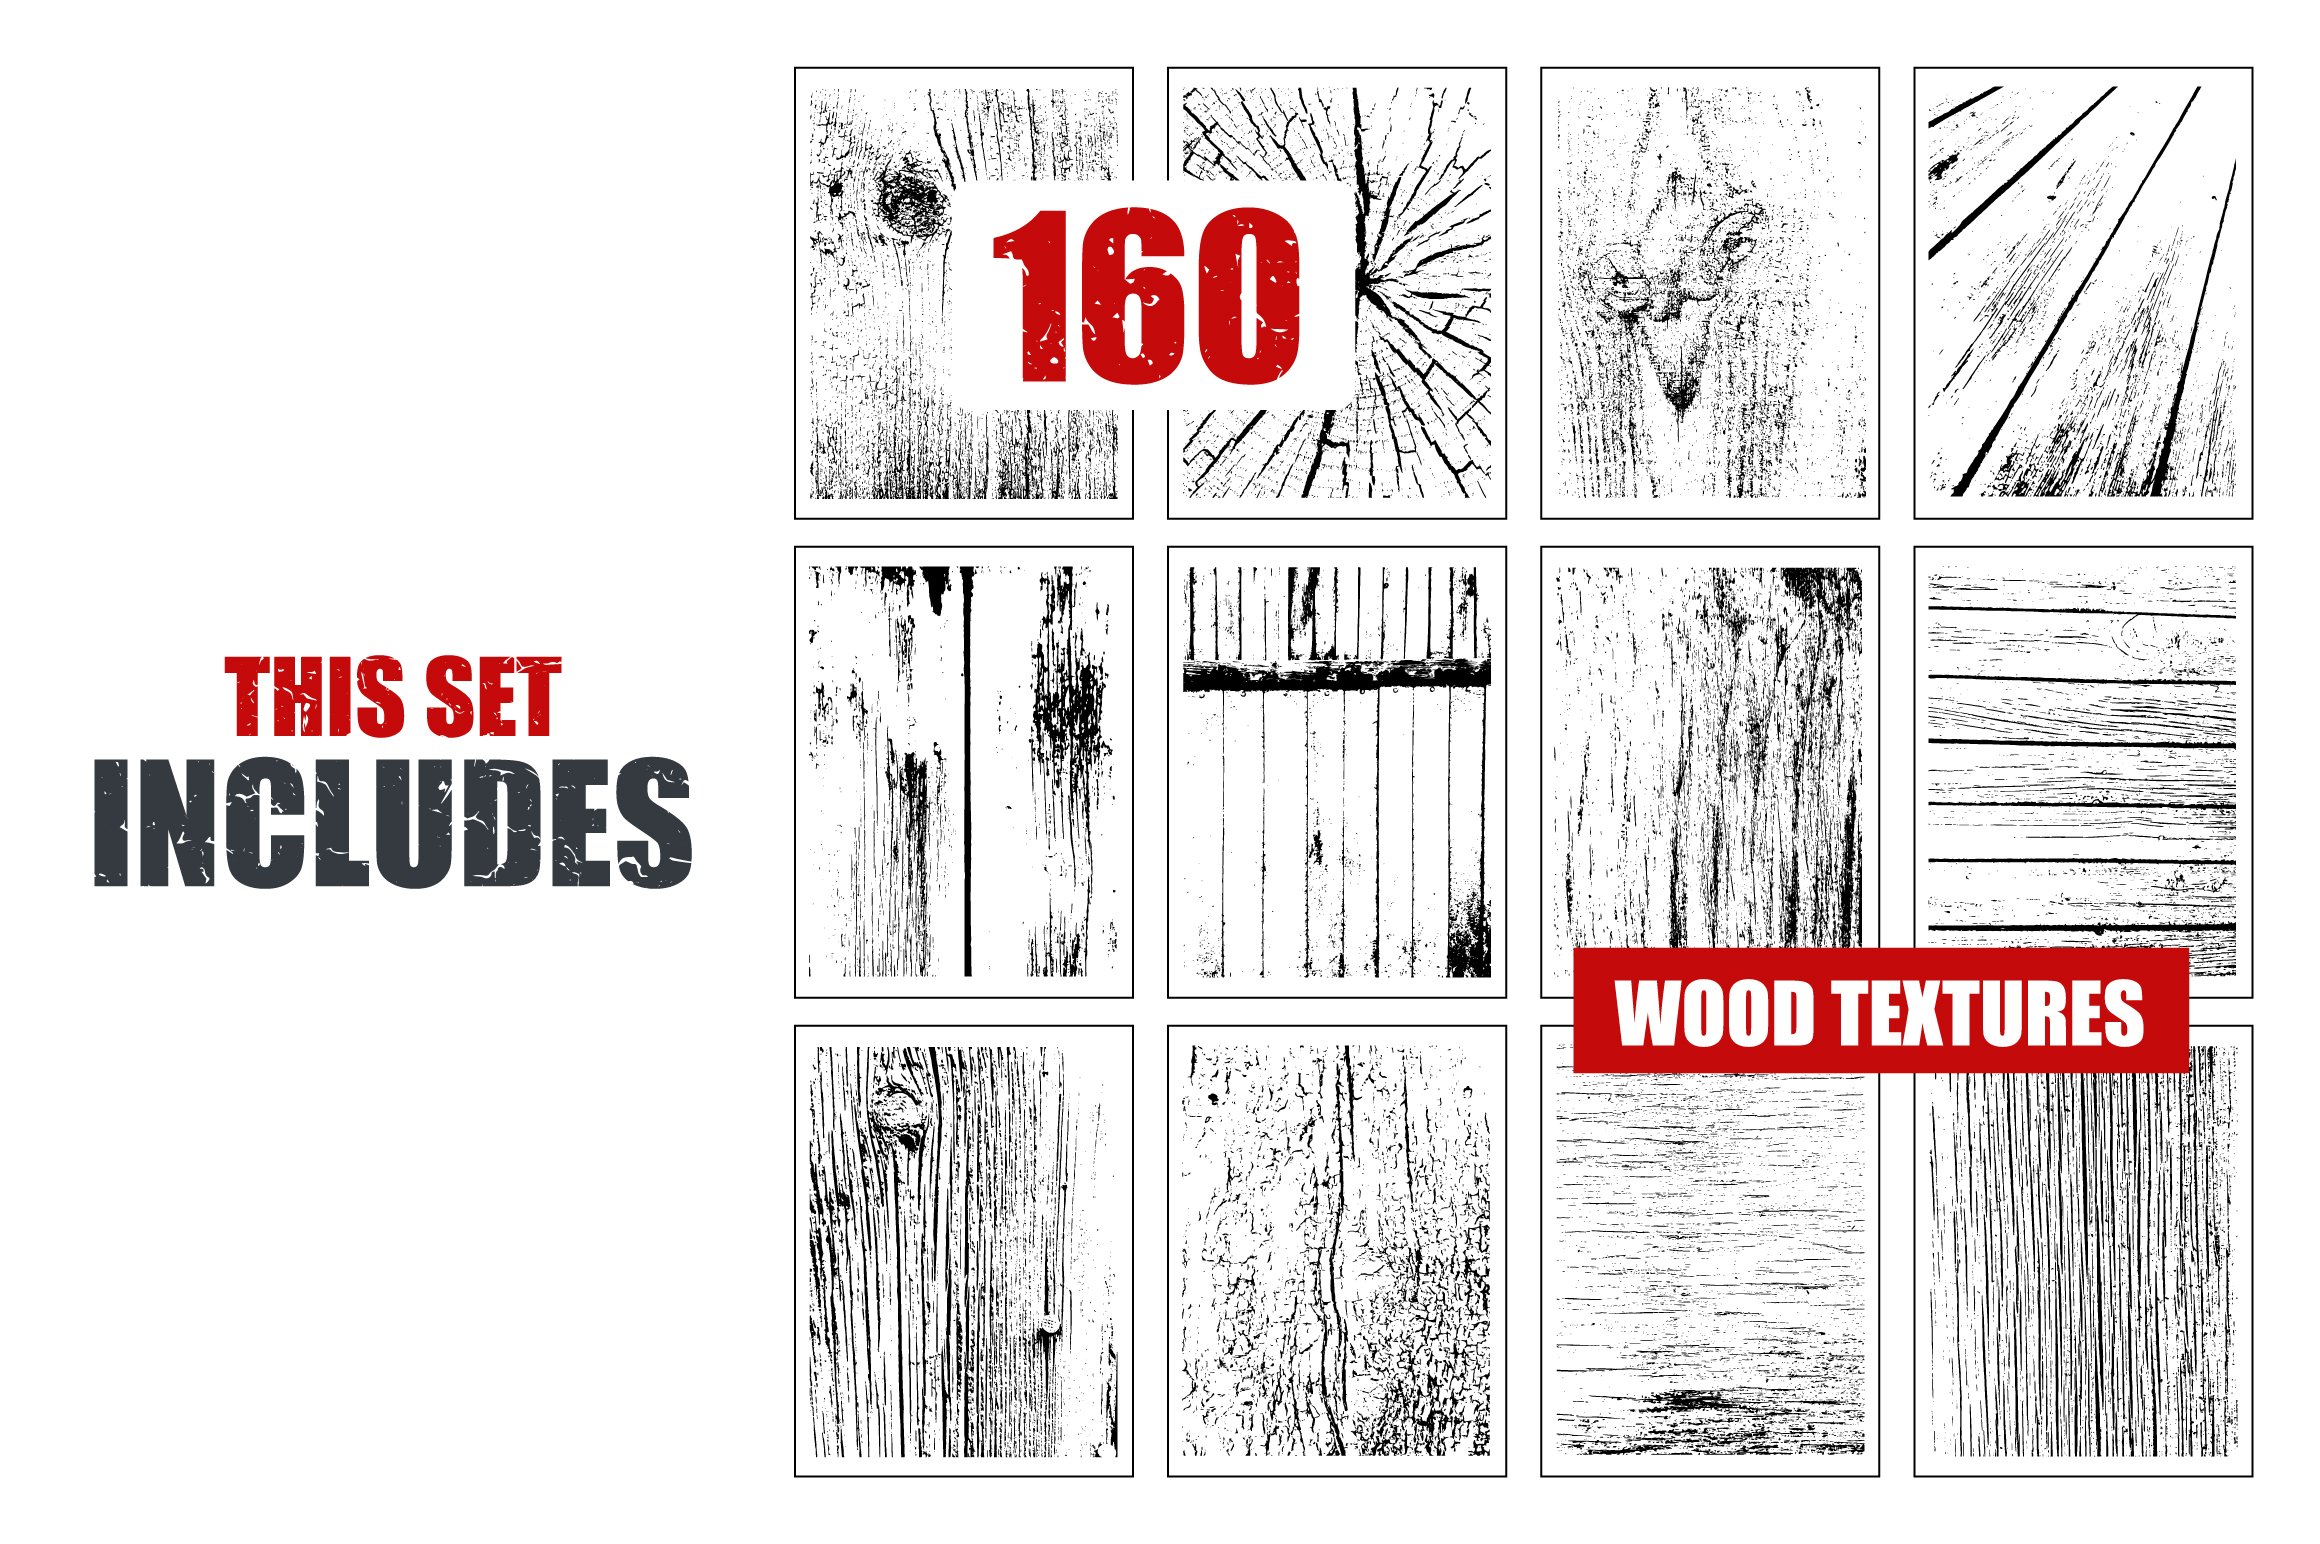 160 Wood Textures cover image.